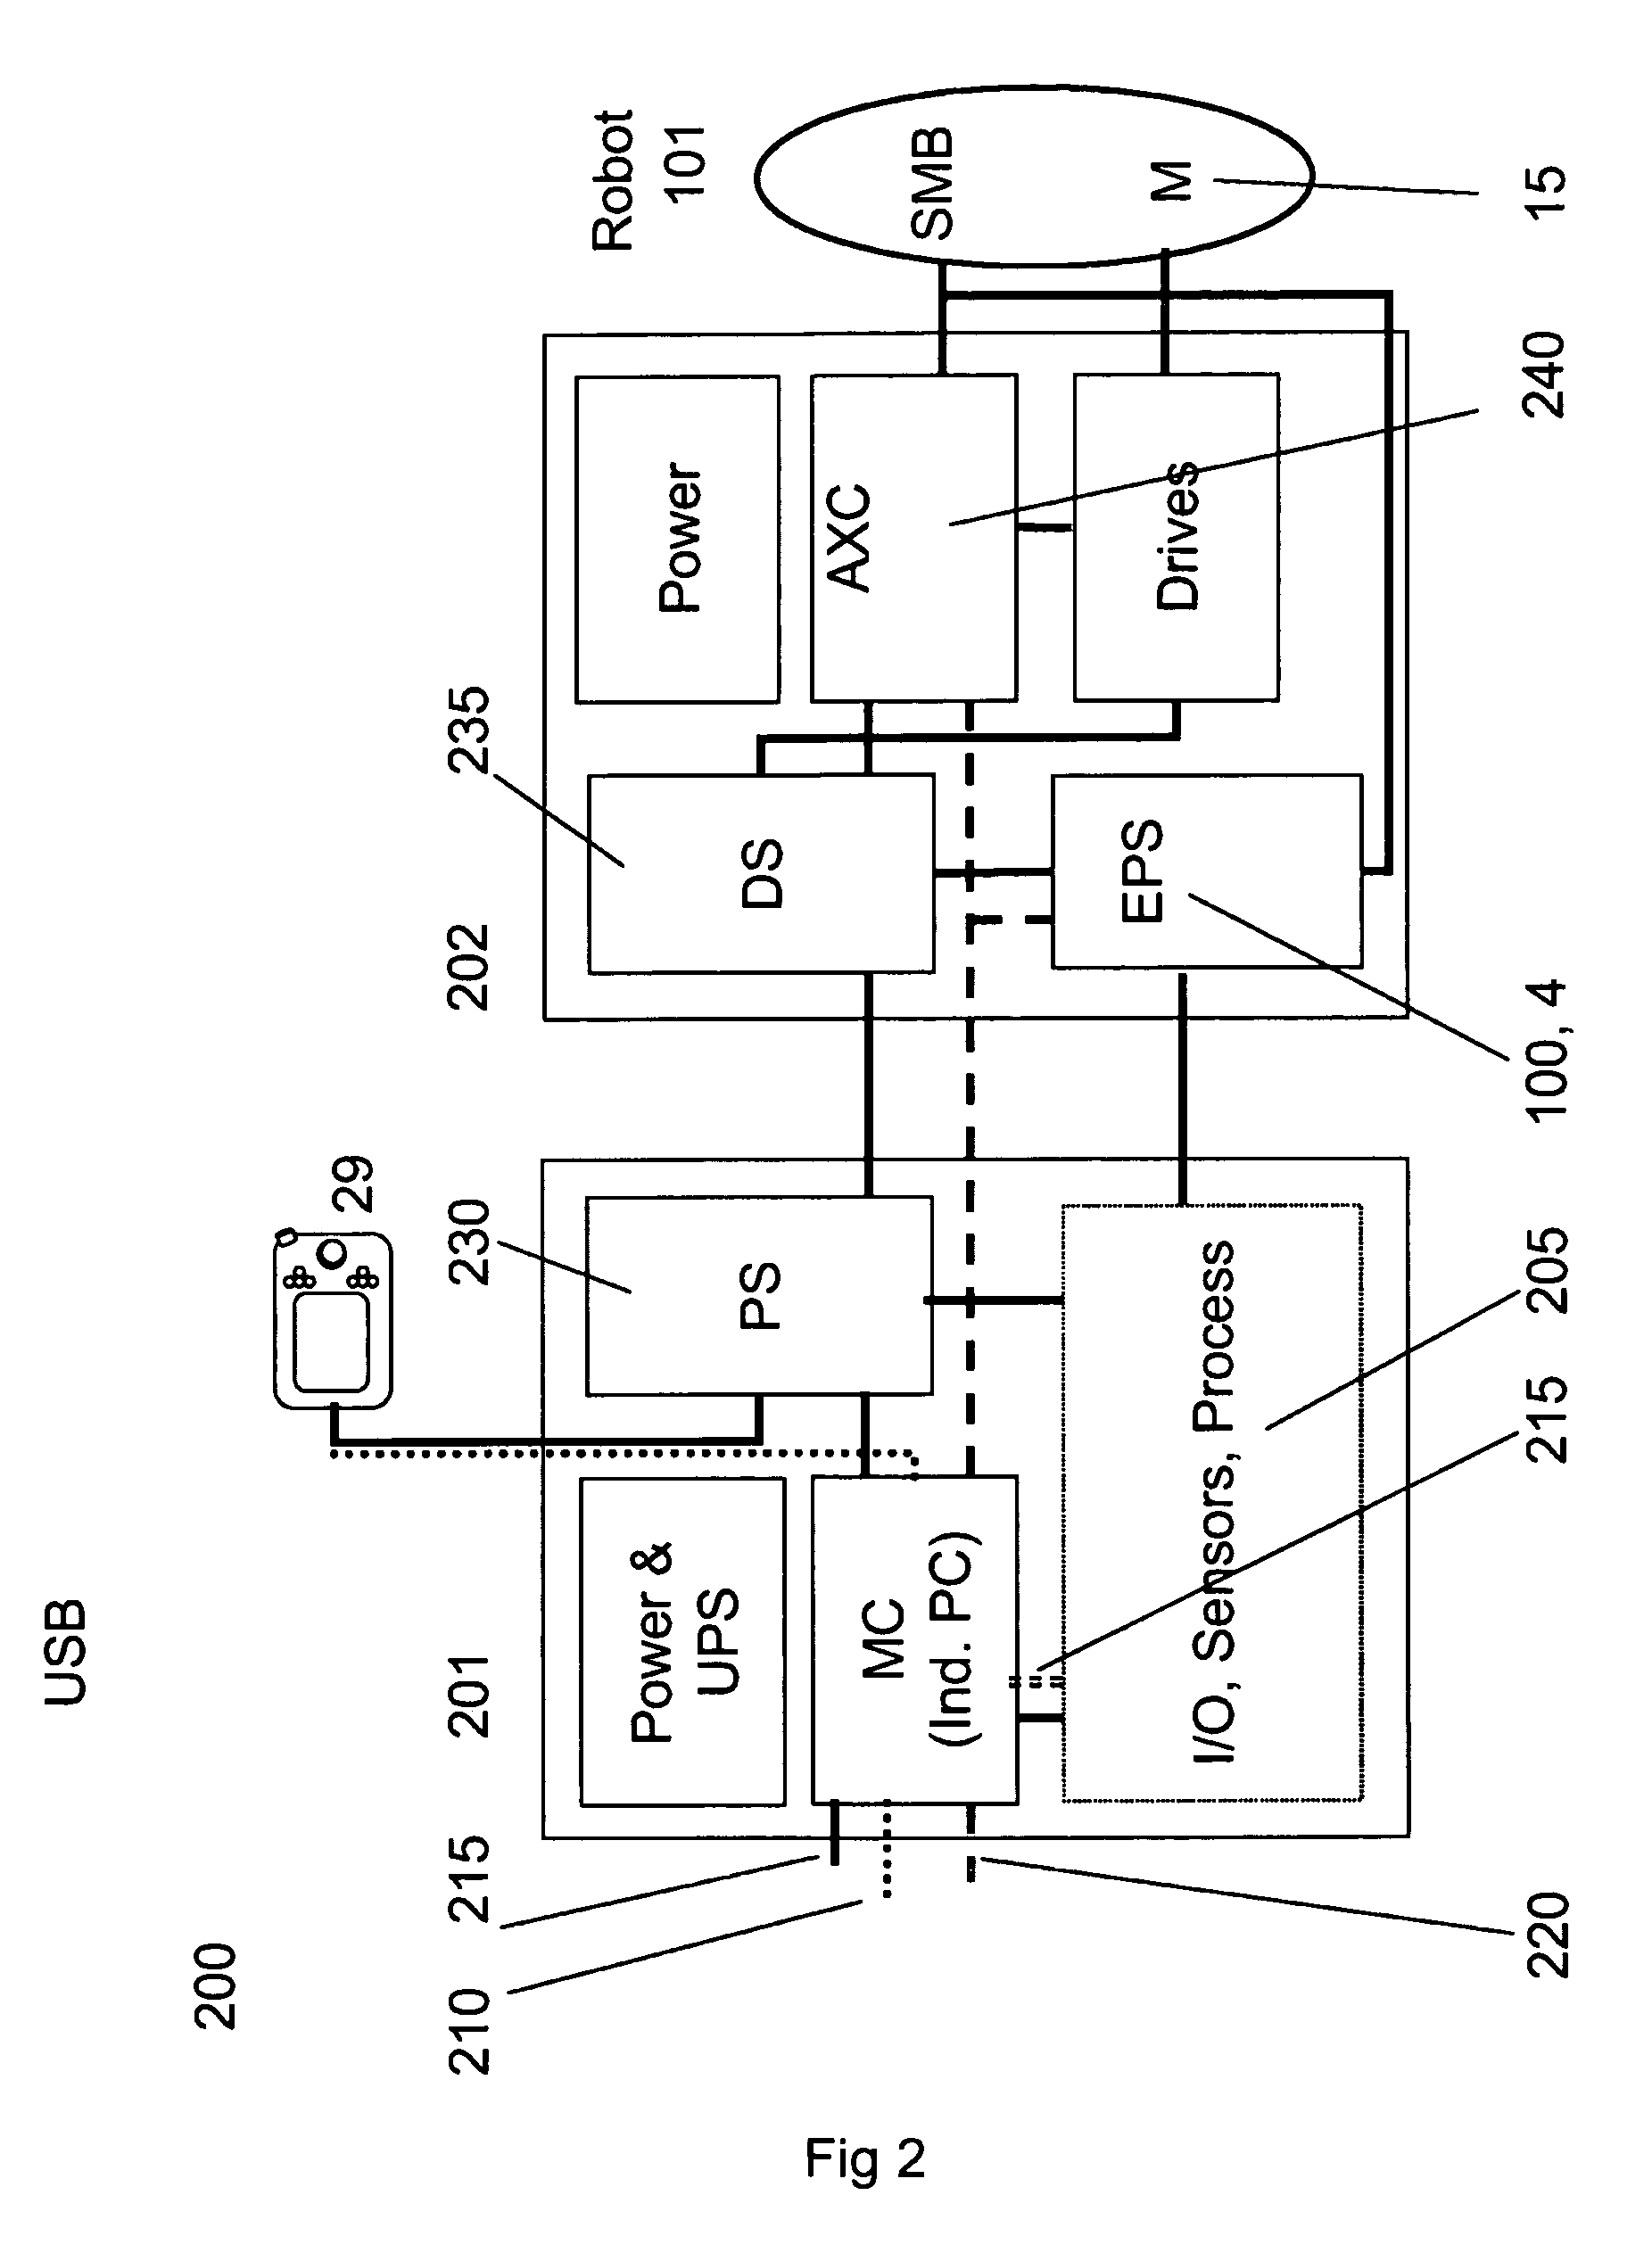 Method and device for controlling motion of an industrial robot with a position switch